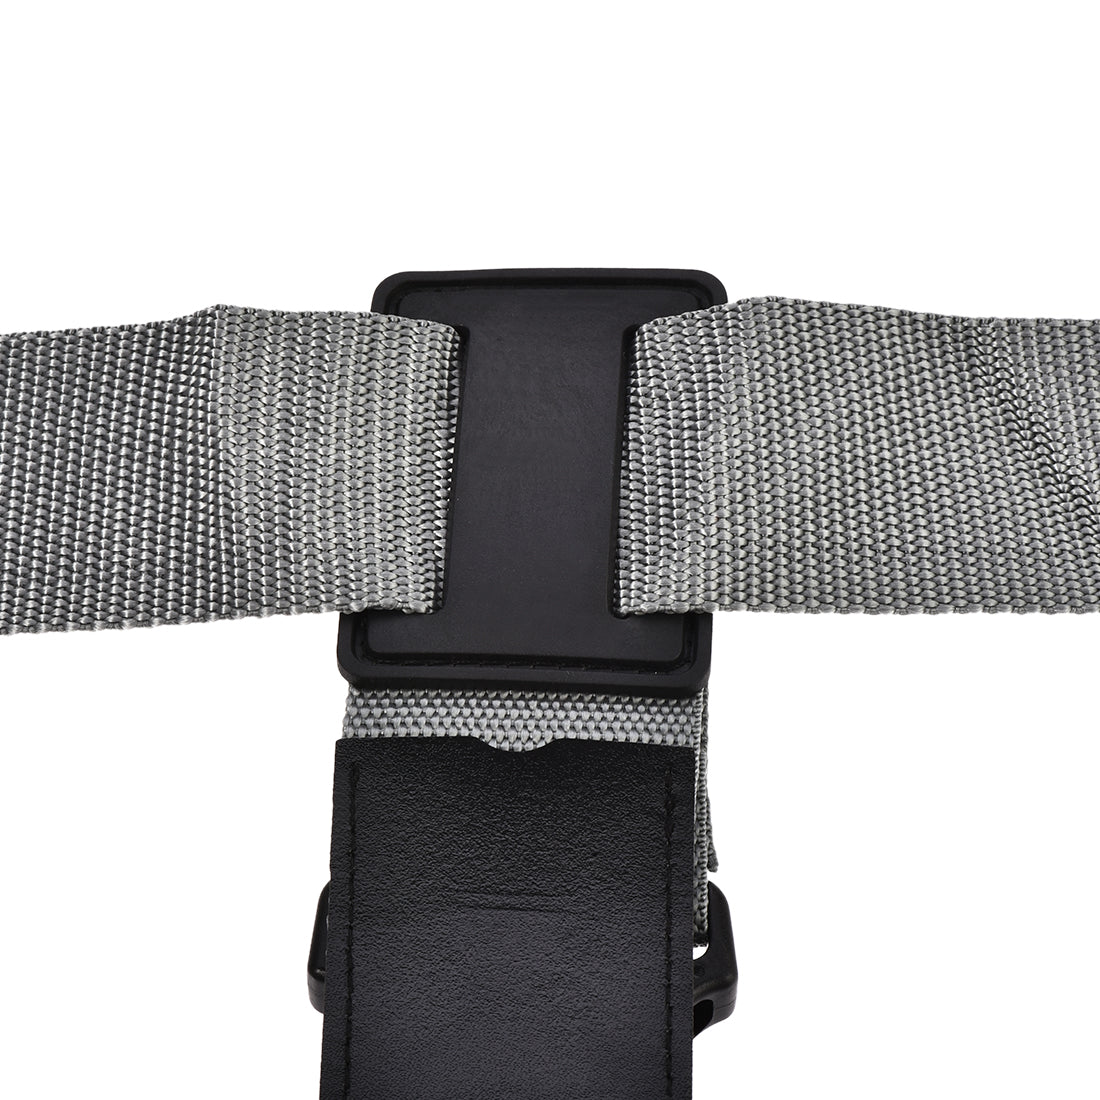 Uxcell Uxcell Luggage Straps Suitcase Belts with 2 Buckles, 2Mx5cm Cross Adjustable PP Travel Packing Accessories, Gray 2Pcs